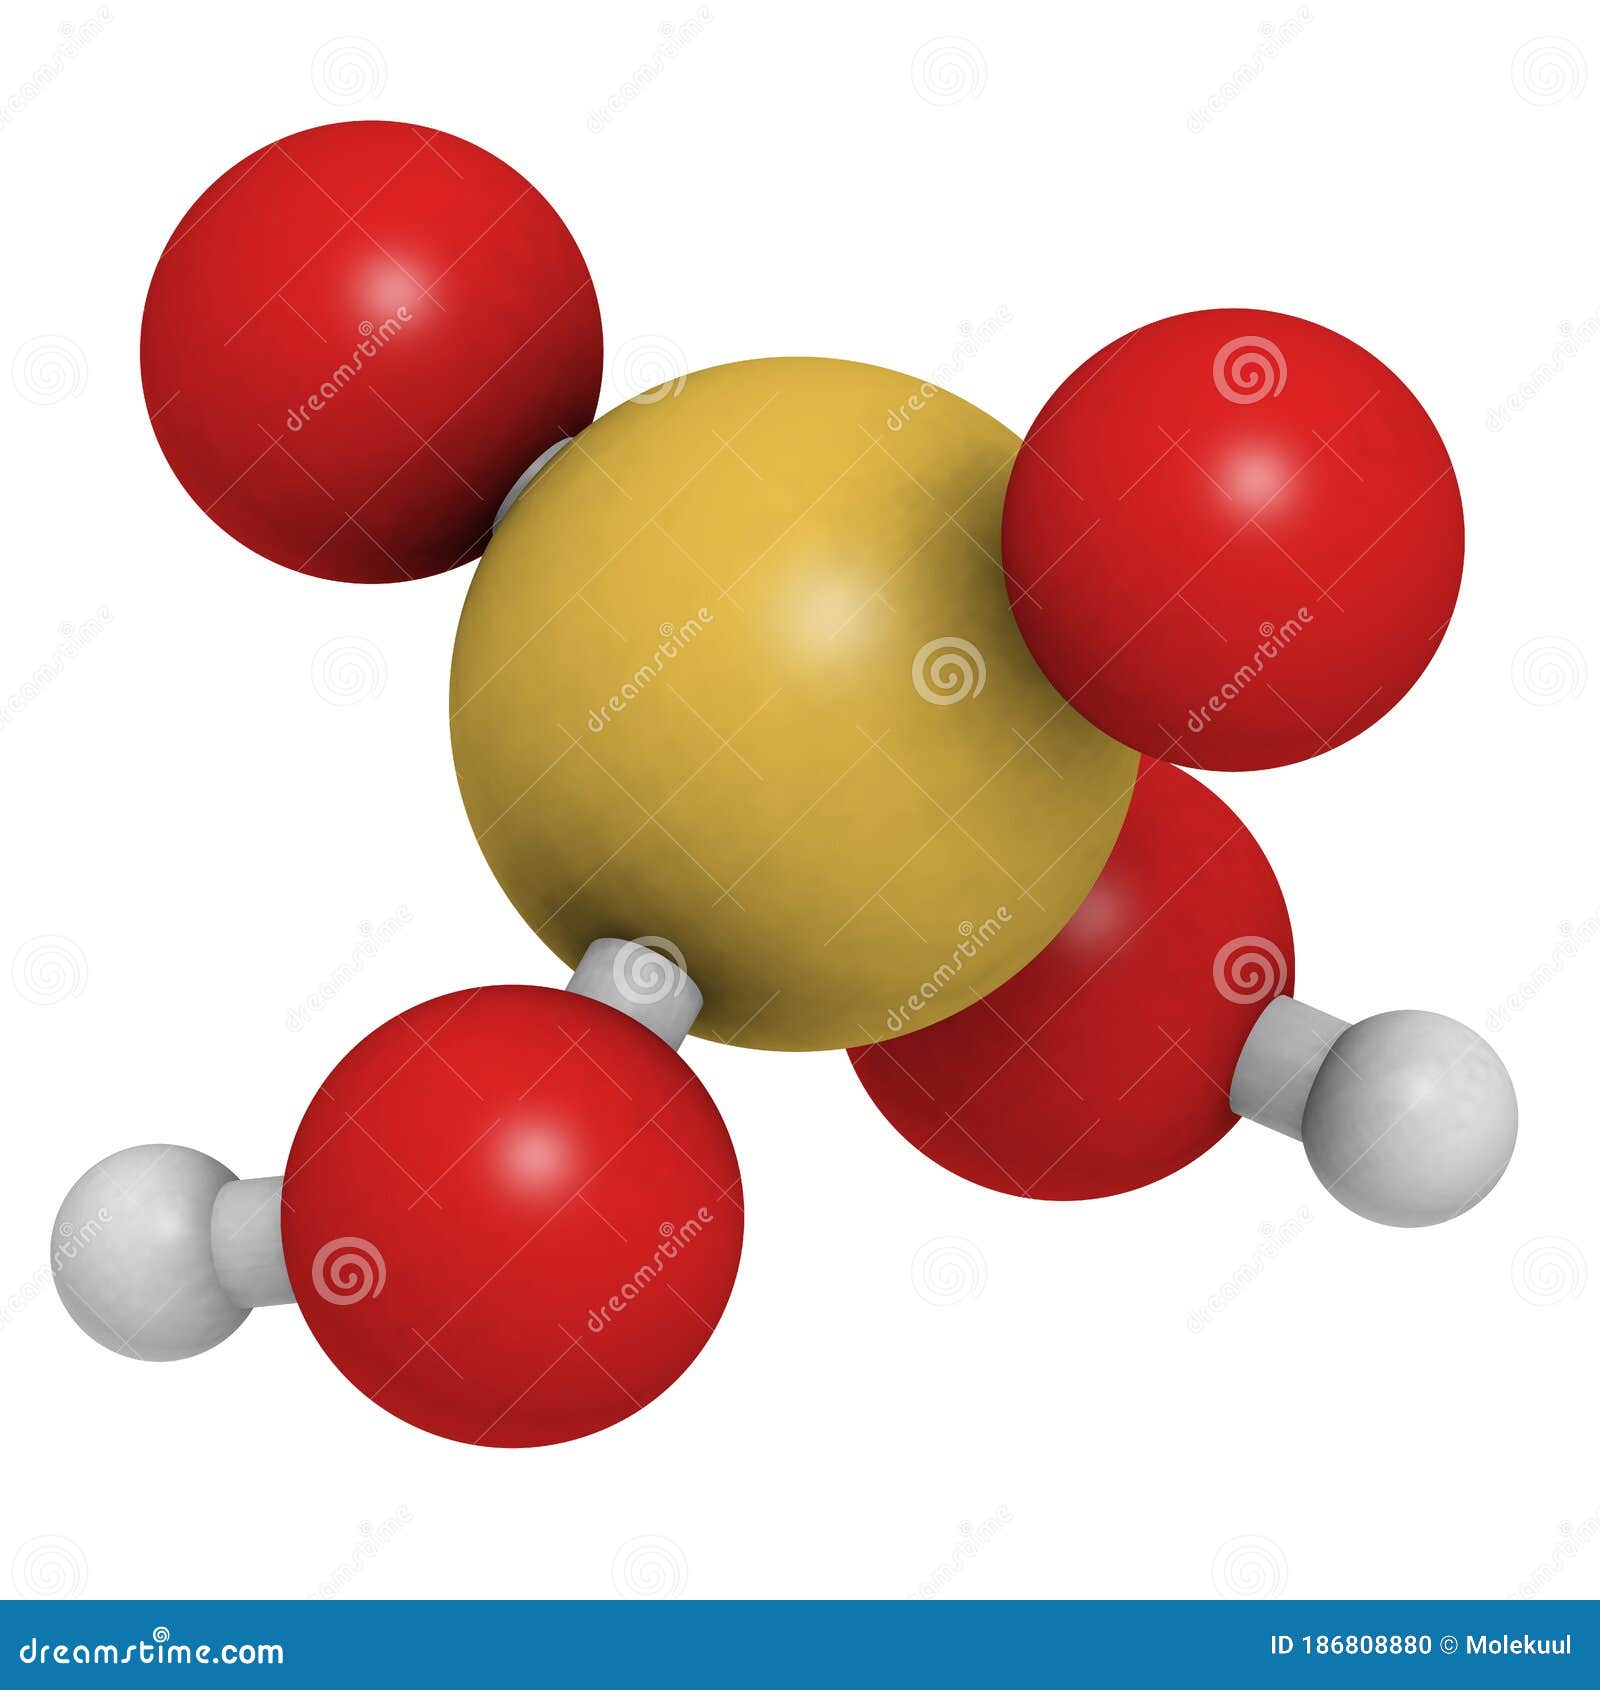 Sulfuric Acid H2so4 Oil Of Vitriol Molecule Chemical Structure H2so4 Is A Highly Corrosive Strong Mineral Acid It Is Used As Stock Illustration Illustration Of Atoms Cleaner 186808880